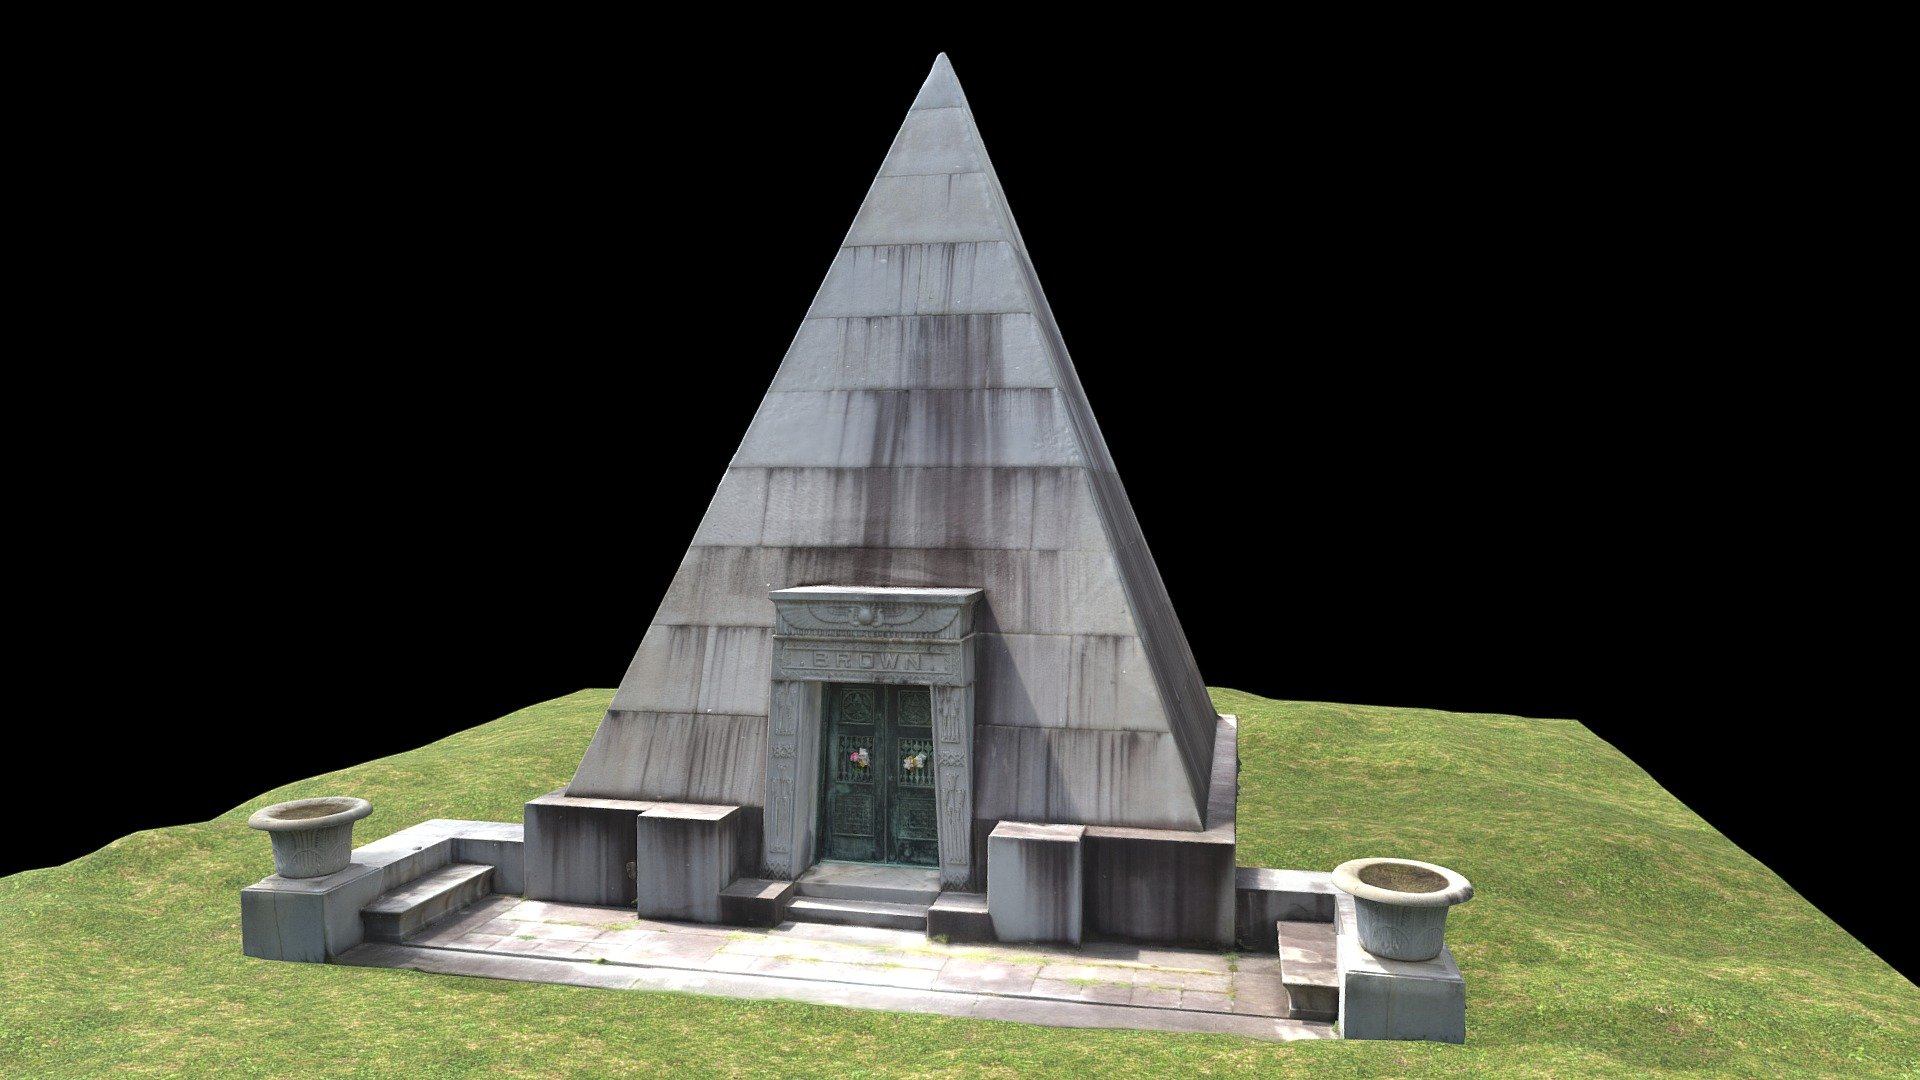 The Egyptian Revival style pyramid mausoleum of Brown family was built in 1898 for William H. Brown and his family.  It is locateed in Homewood Cemetery, Pittsburgh, PA and was designed by architectural firm of  Alden &amp;amp; Harlow, Pittsburgh, PA. Brown was a banker and shipping magnate who was the largest shipper of coal on the Mississippi and Ohio Rivers.

Created from 388 photographs (Canon EOS Rebel T7i) using Metashape 1.7.0.  Minor mesh edits adn creation of the ground plane done in Blender 2.92.  Minor texture edits made in Photoshop CS.

Photographed in August 2021 - William H. Brown Family Mausoleum, Pittsburgh - 3D model by danderson4 3d model